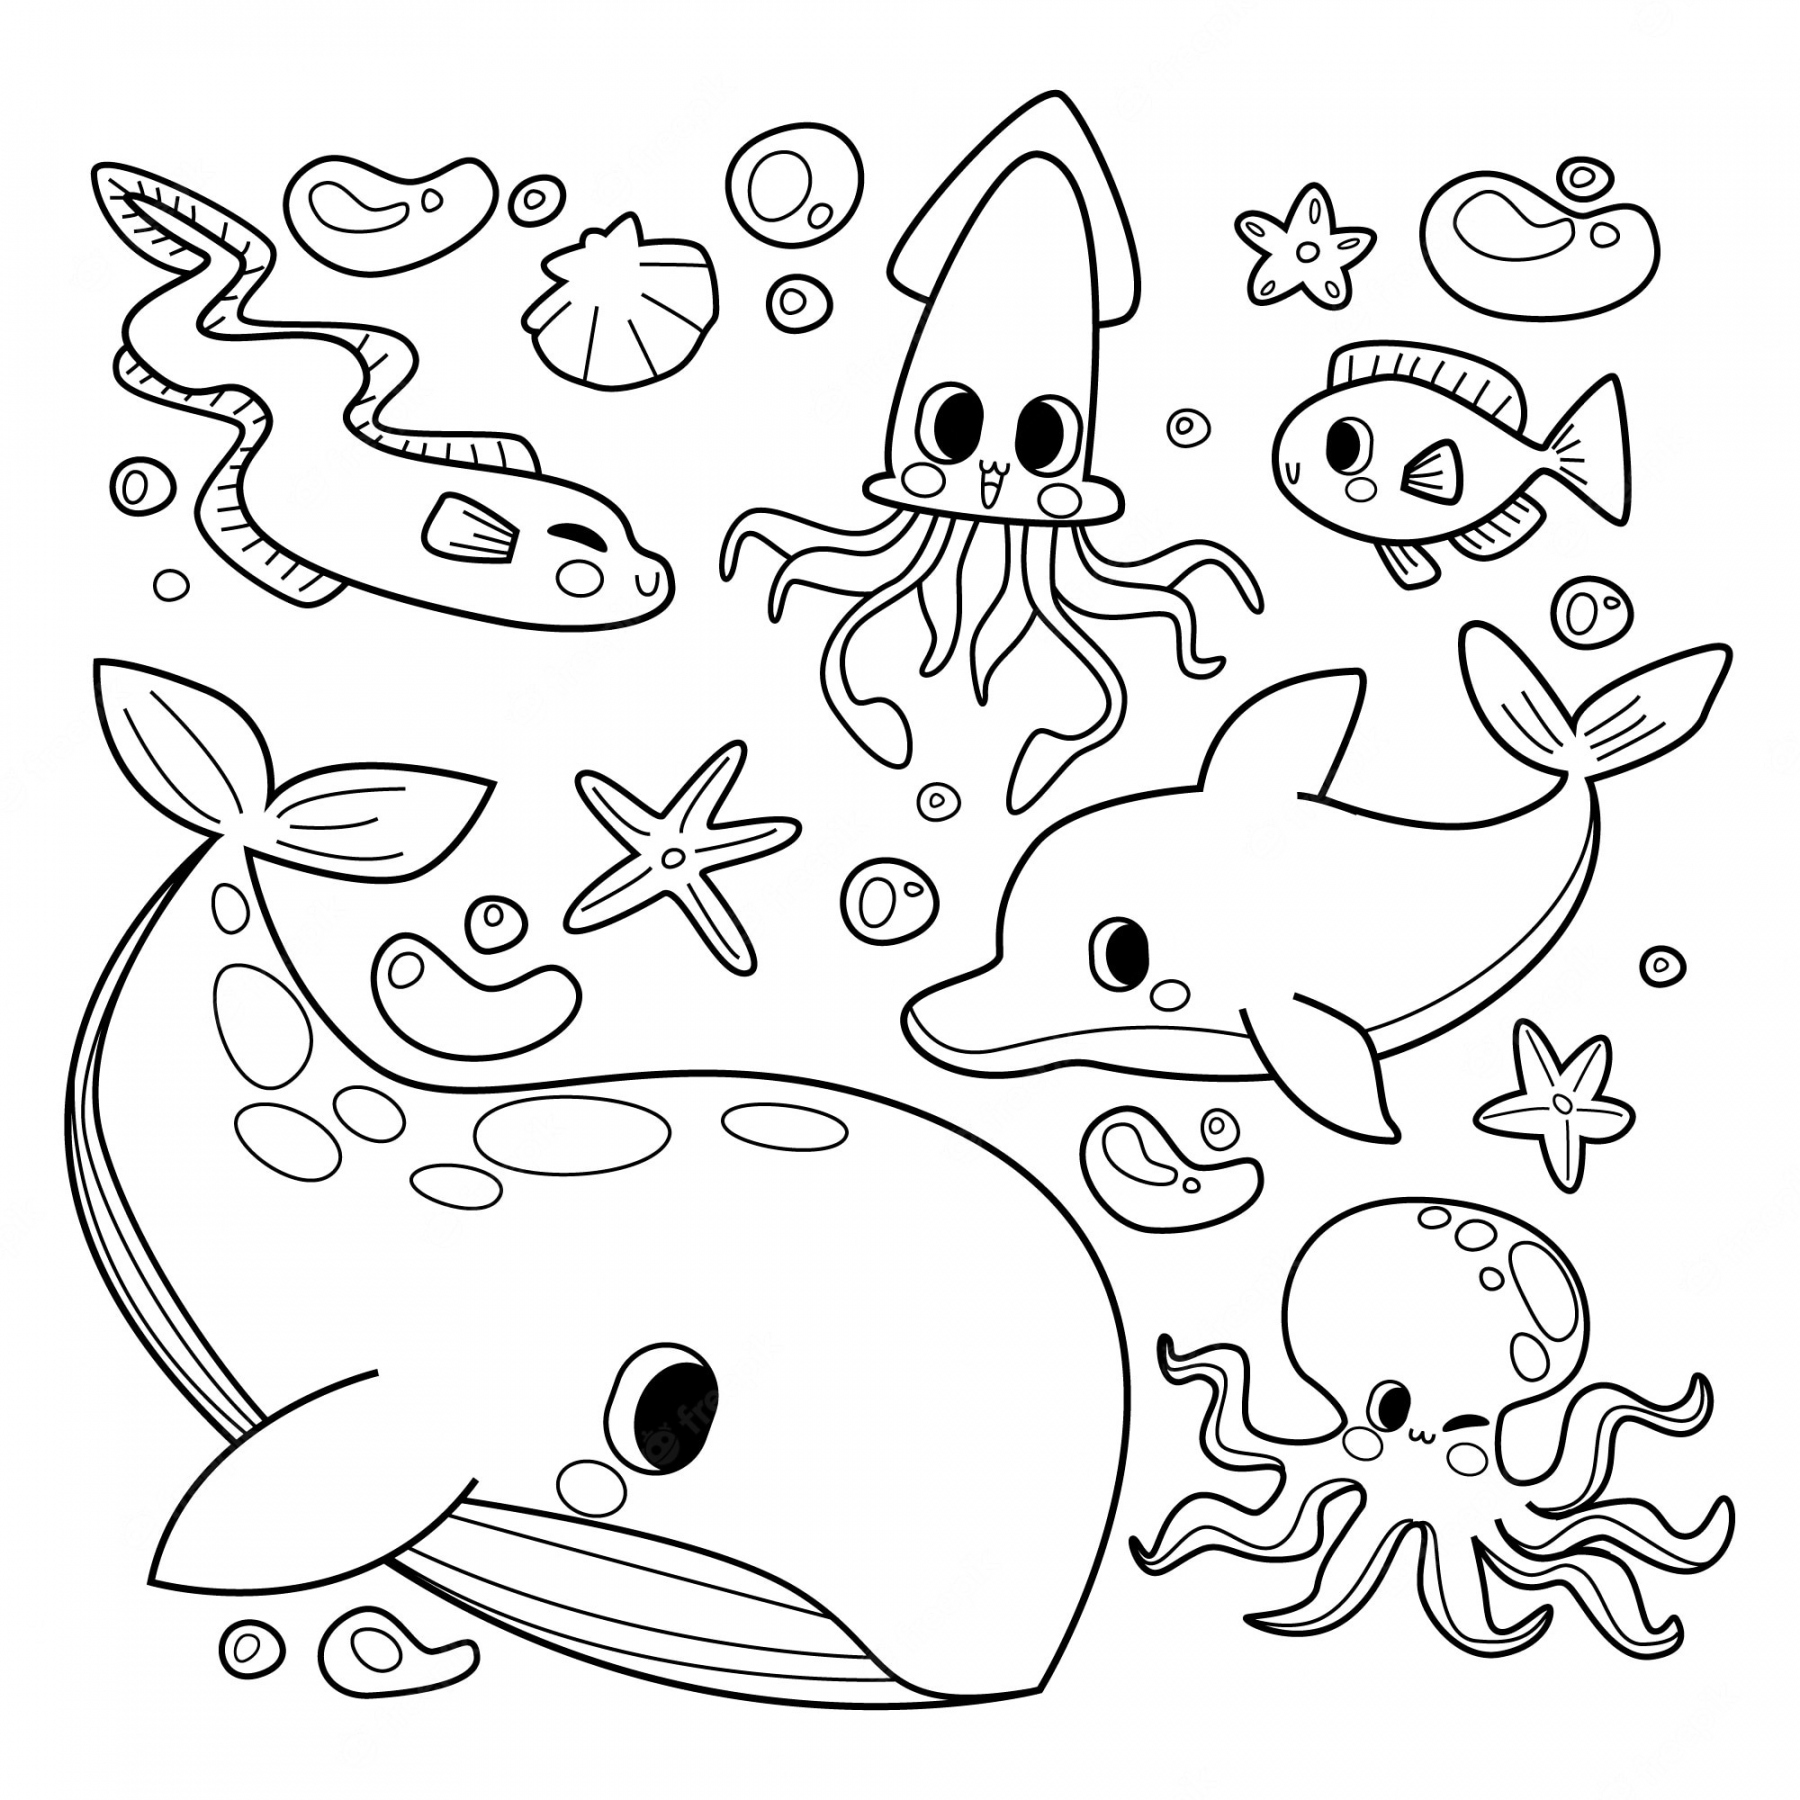 Free Coloring Sheets Printable - Printable - Coloring Pages Images - Free Download on Freepik